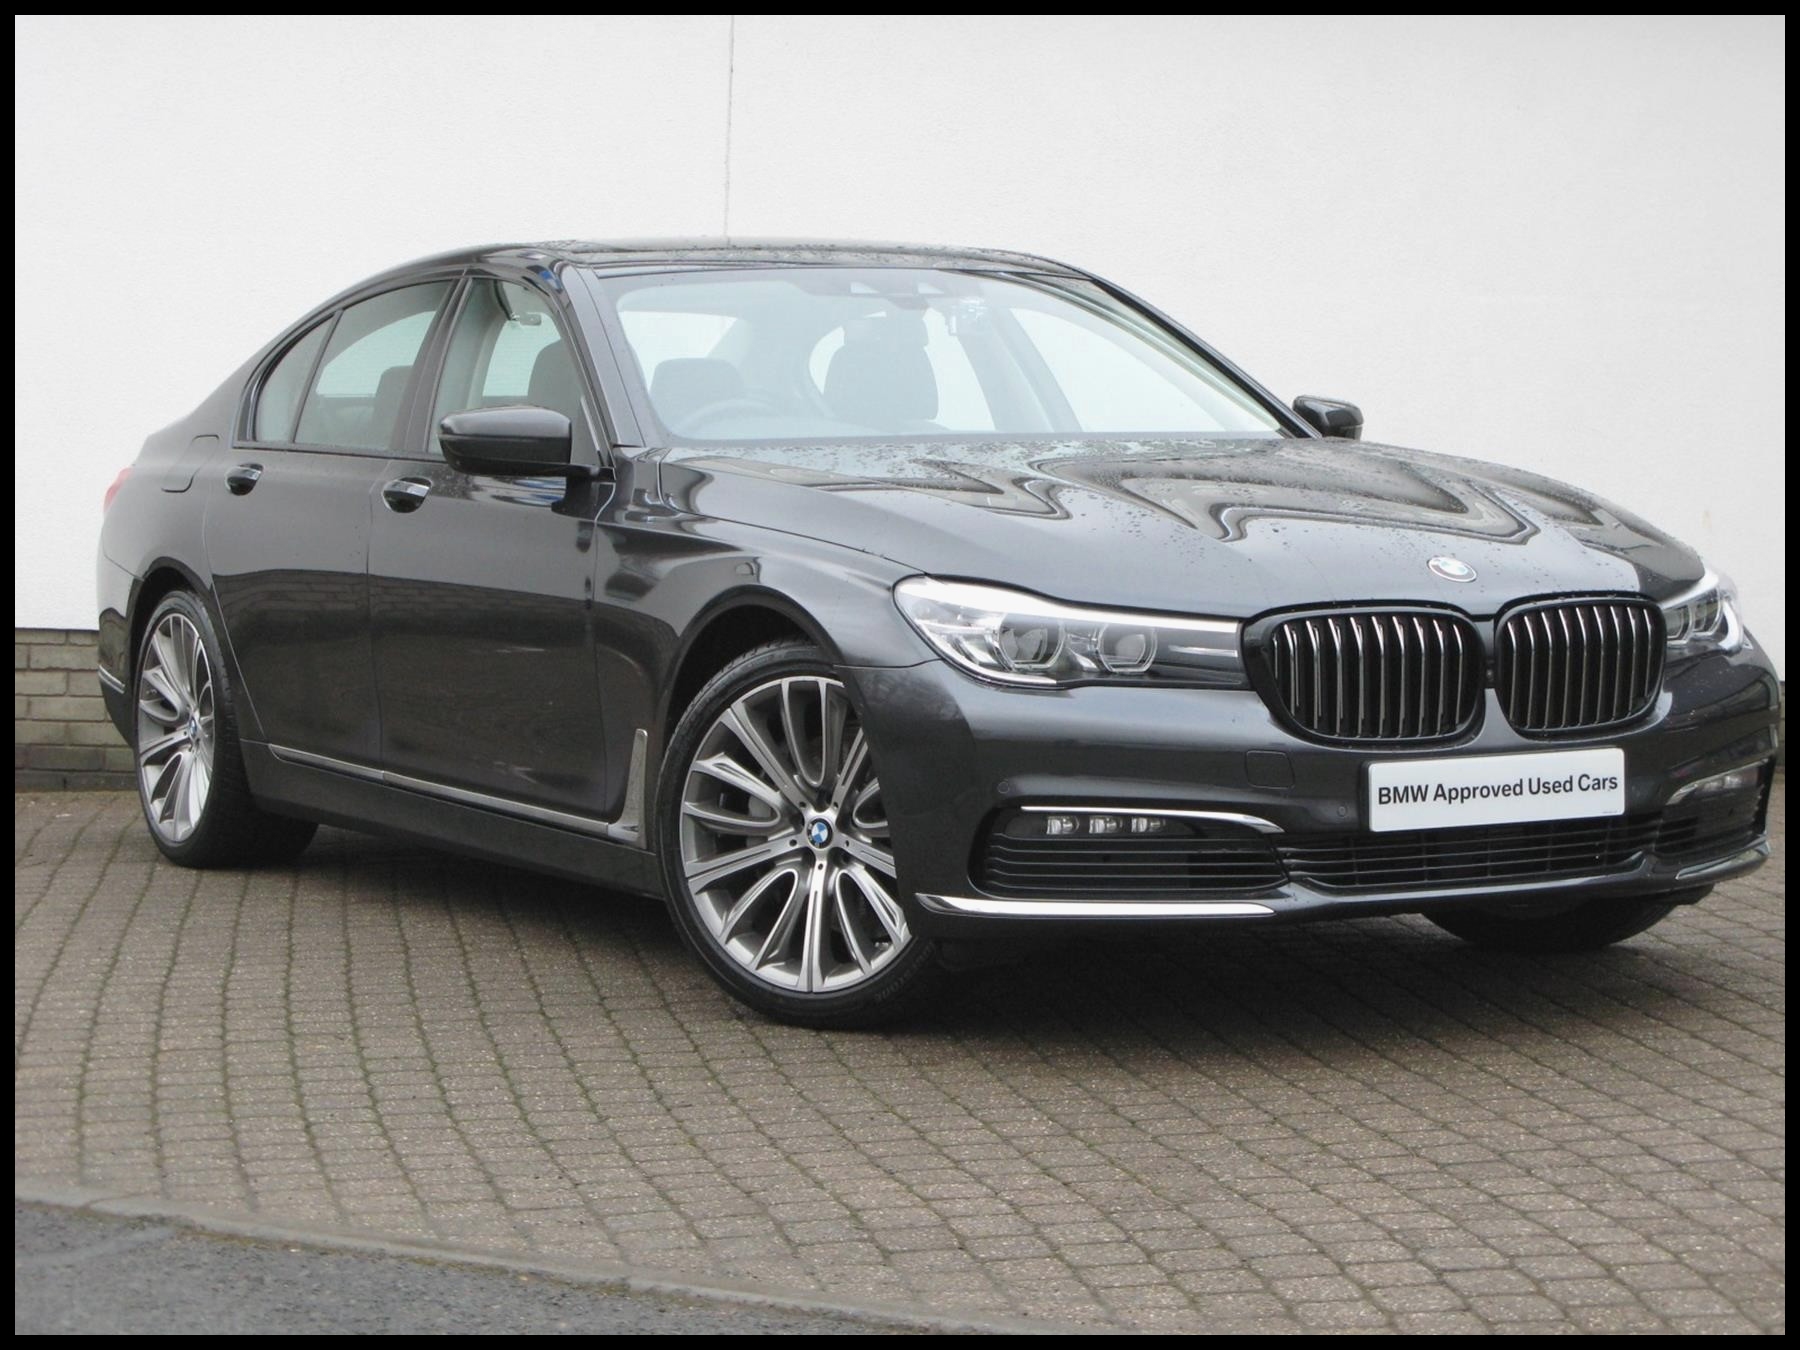 Used Bmw 745i for Sale Lovely Awesome Used 2017 Bmw 7 Series G11 740d Xdrive Saloon